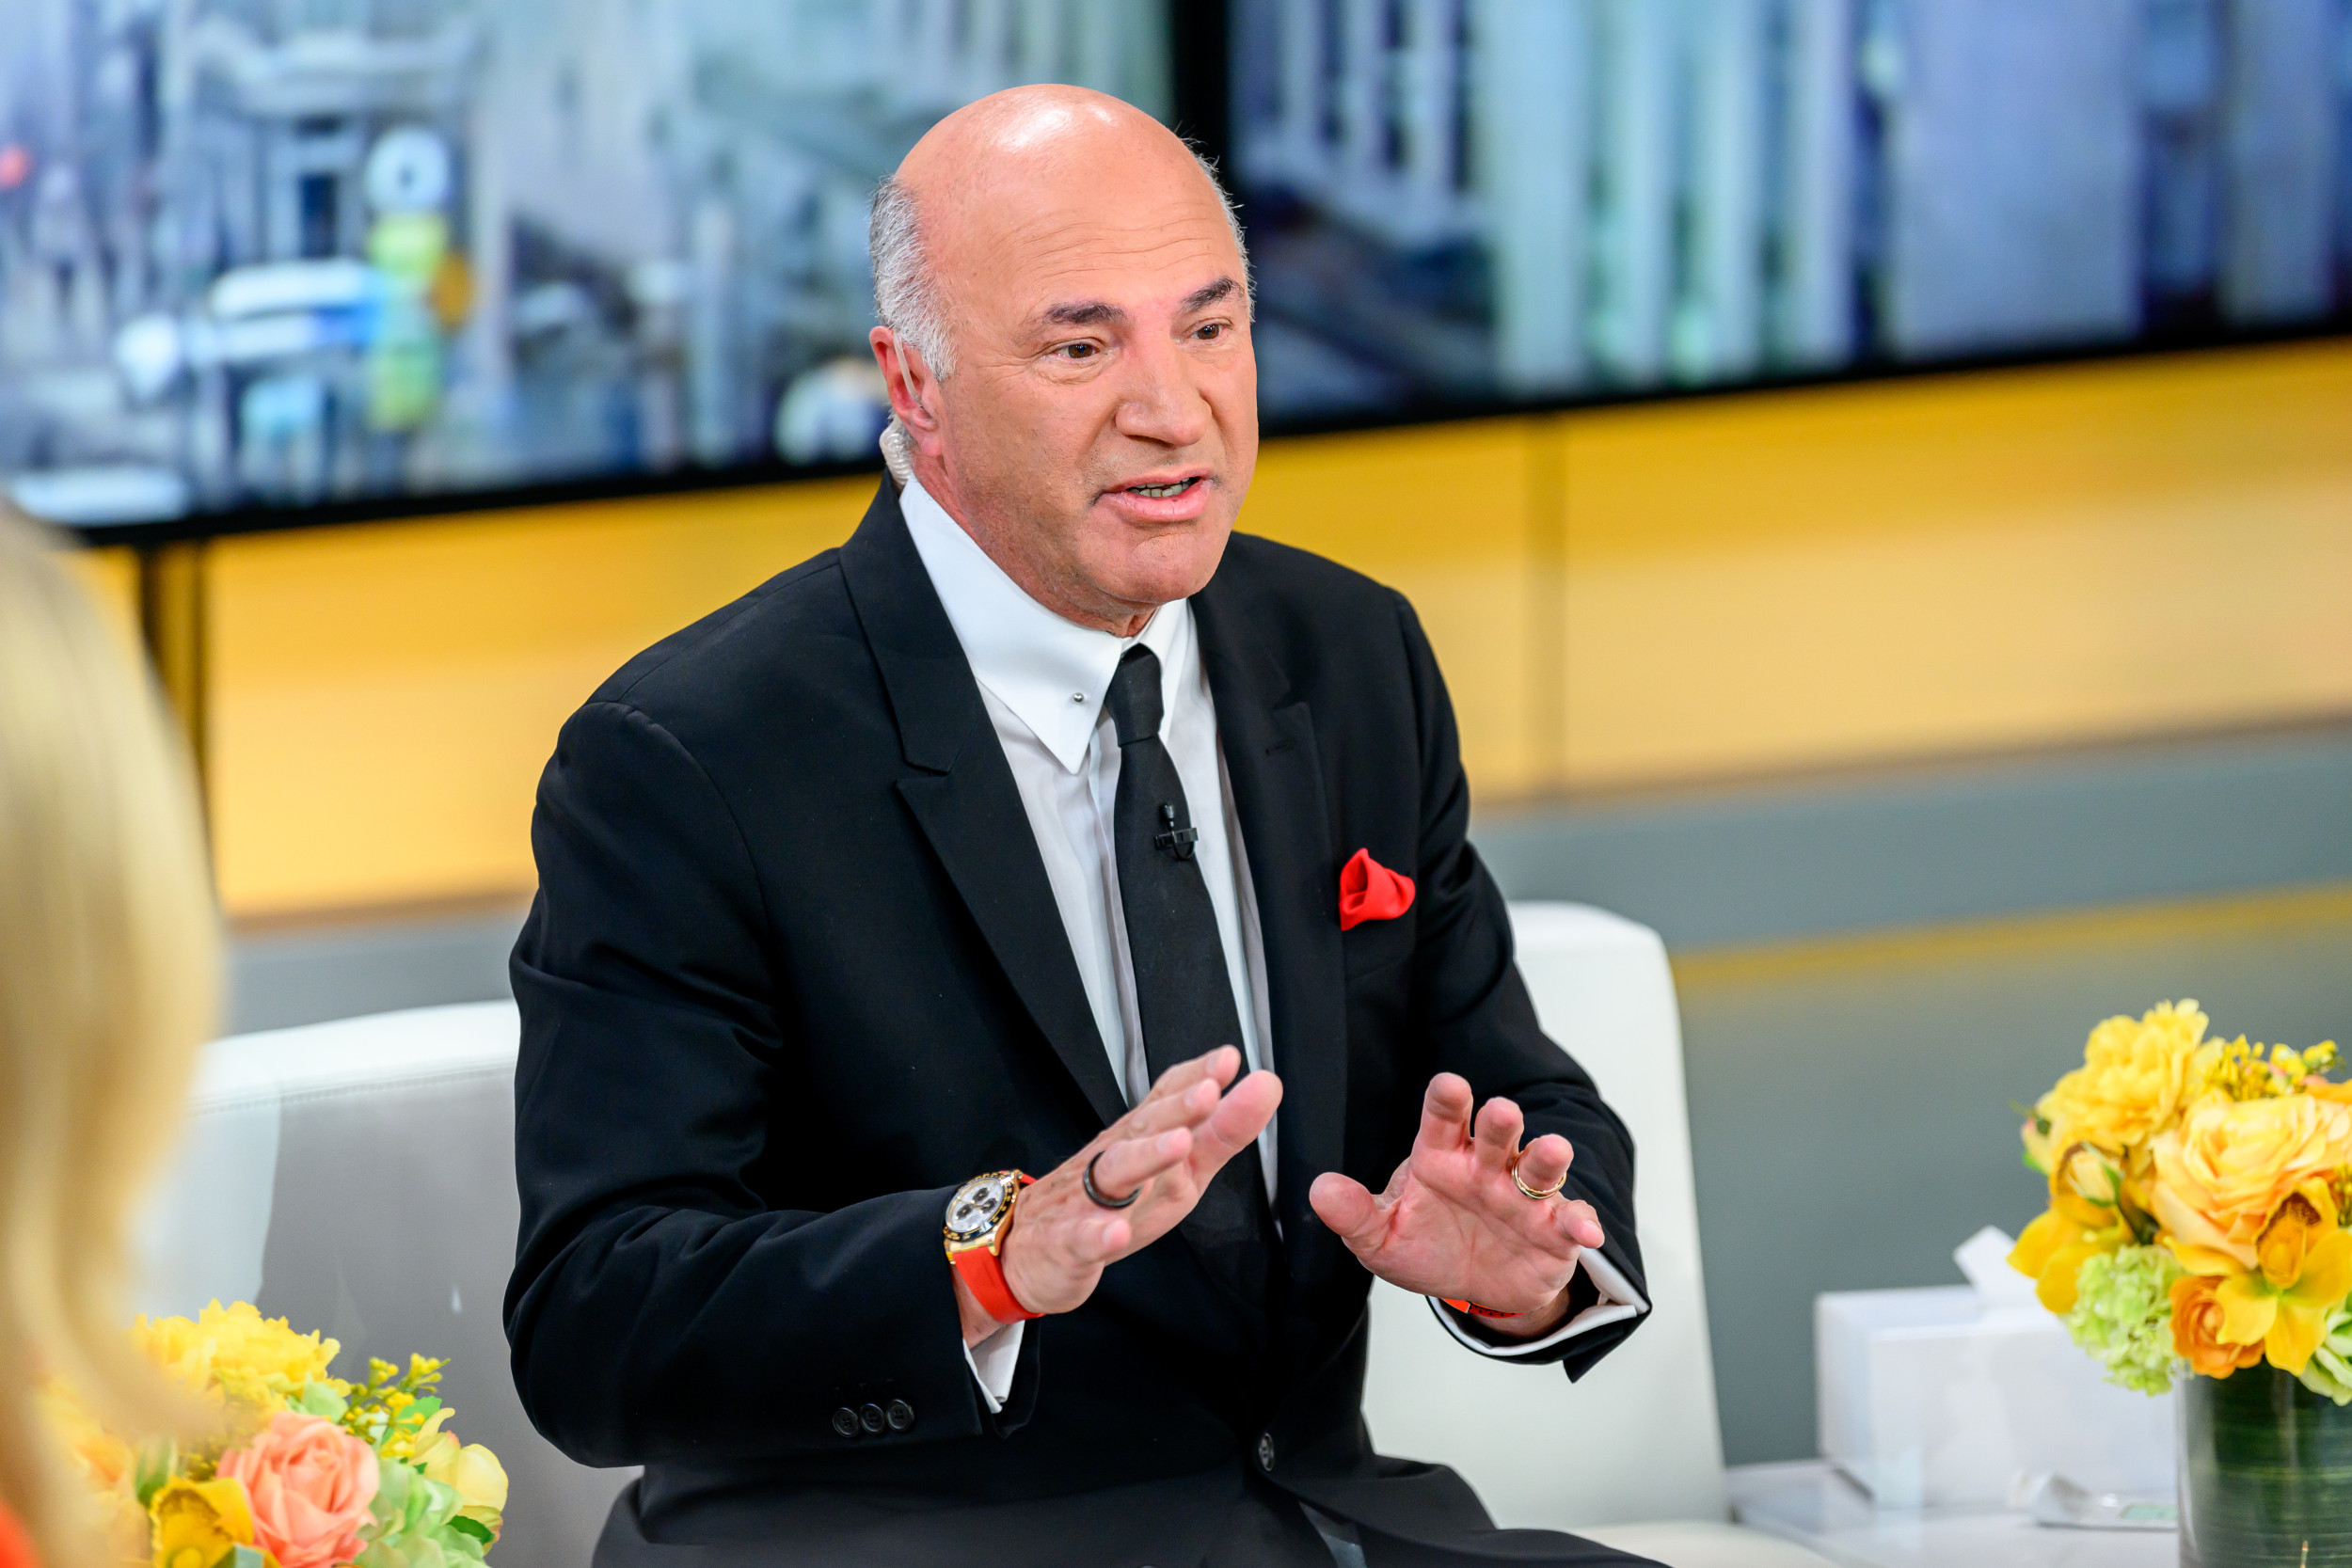 'shark tank's kevin o'leary warns student protesters are 'screwed'